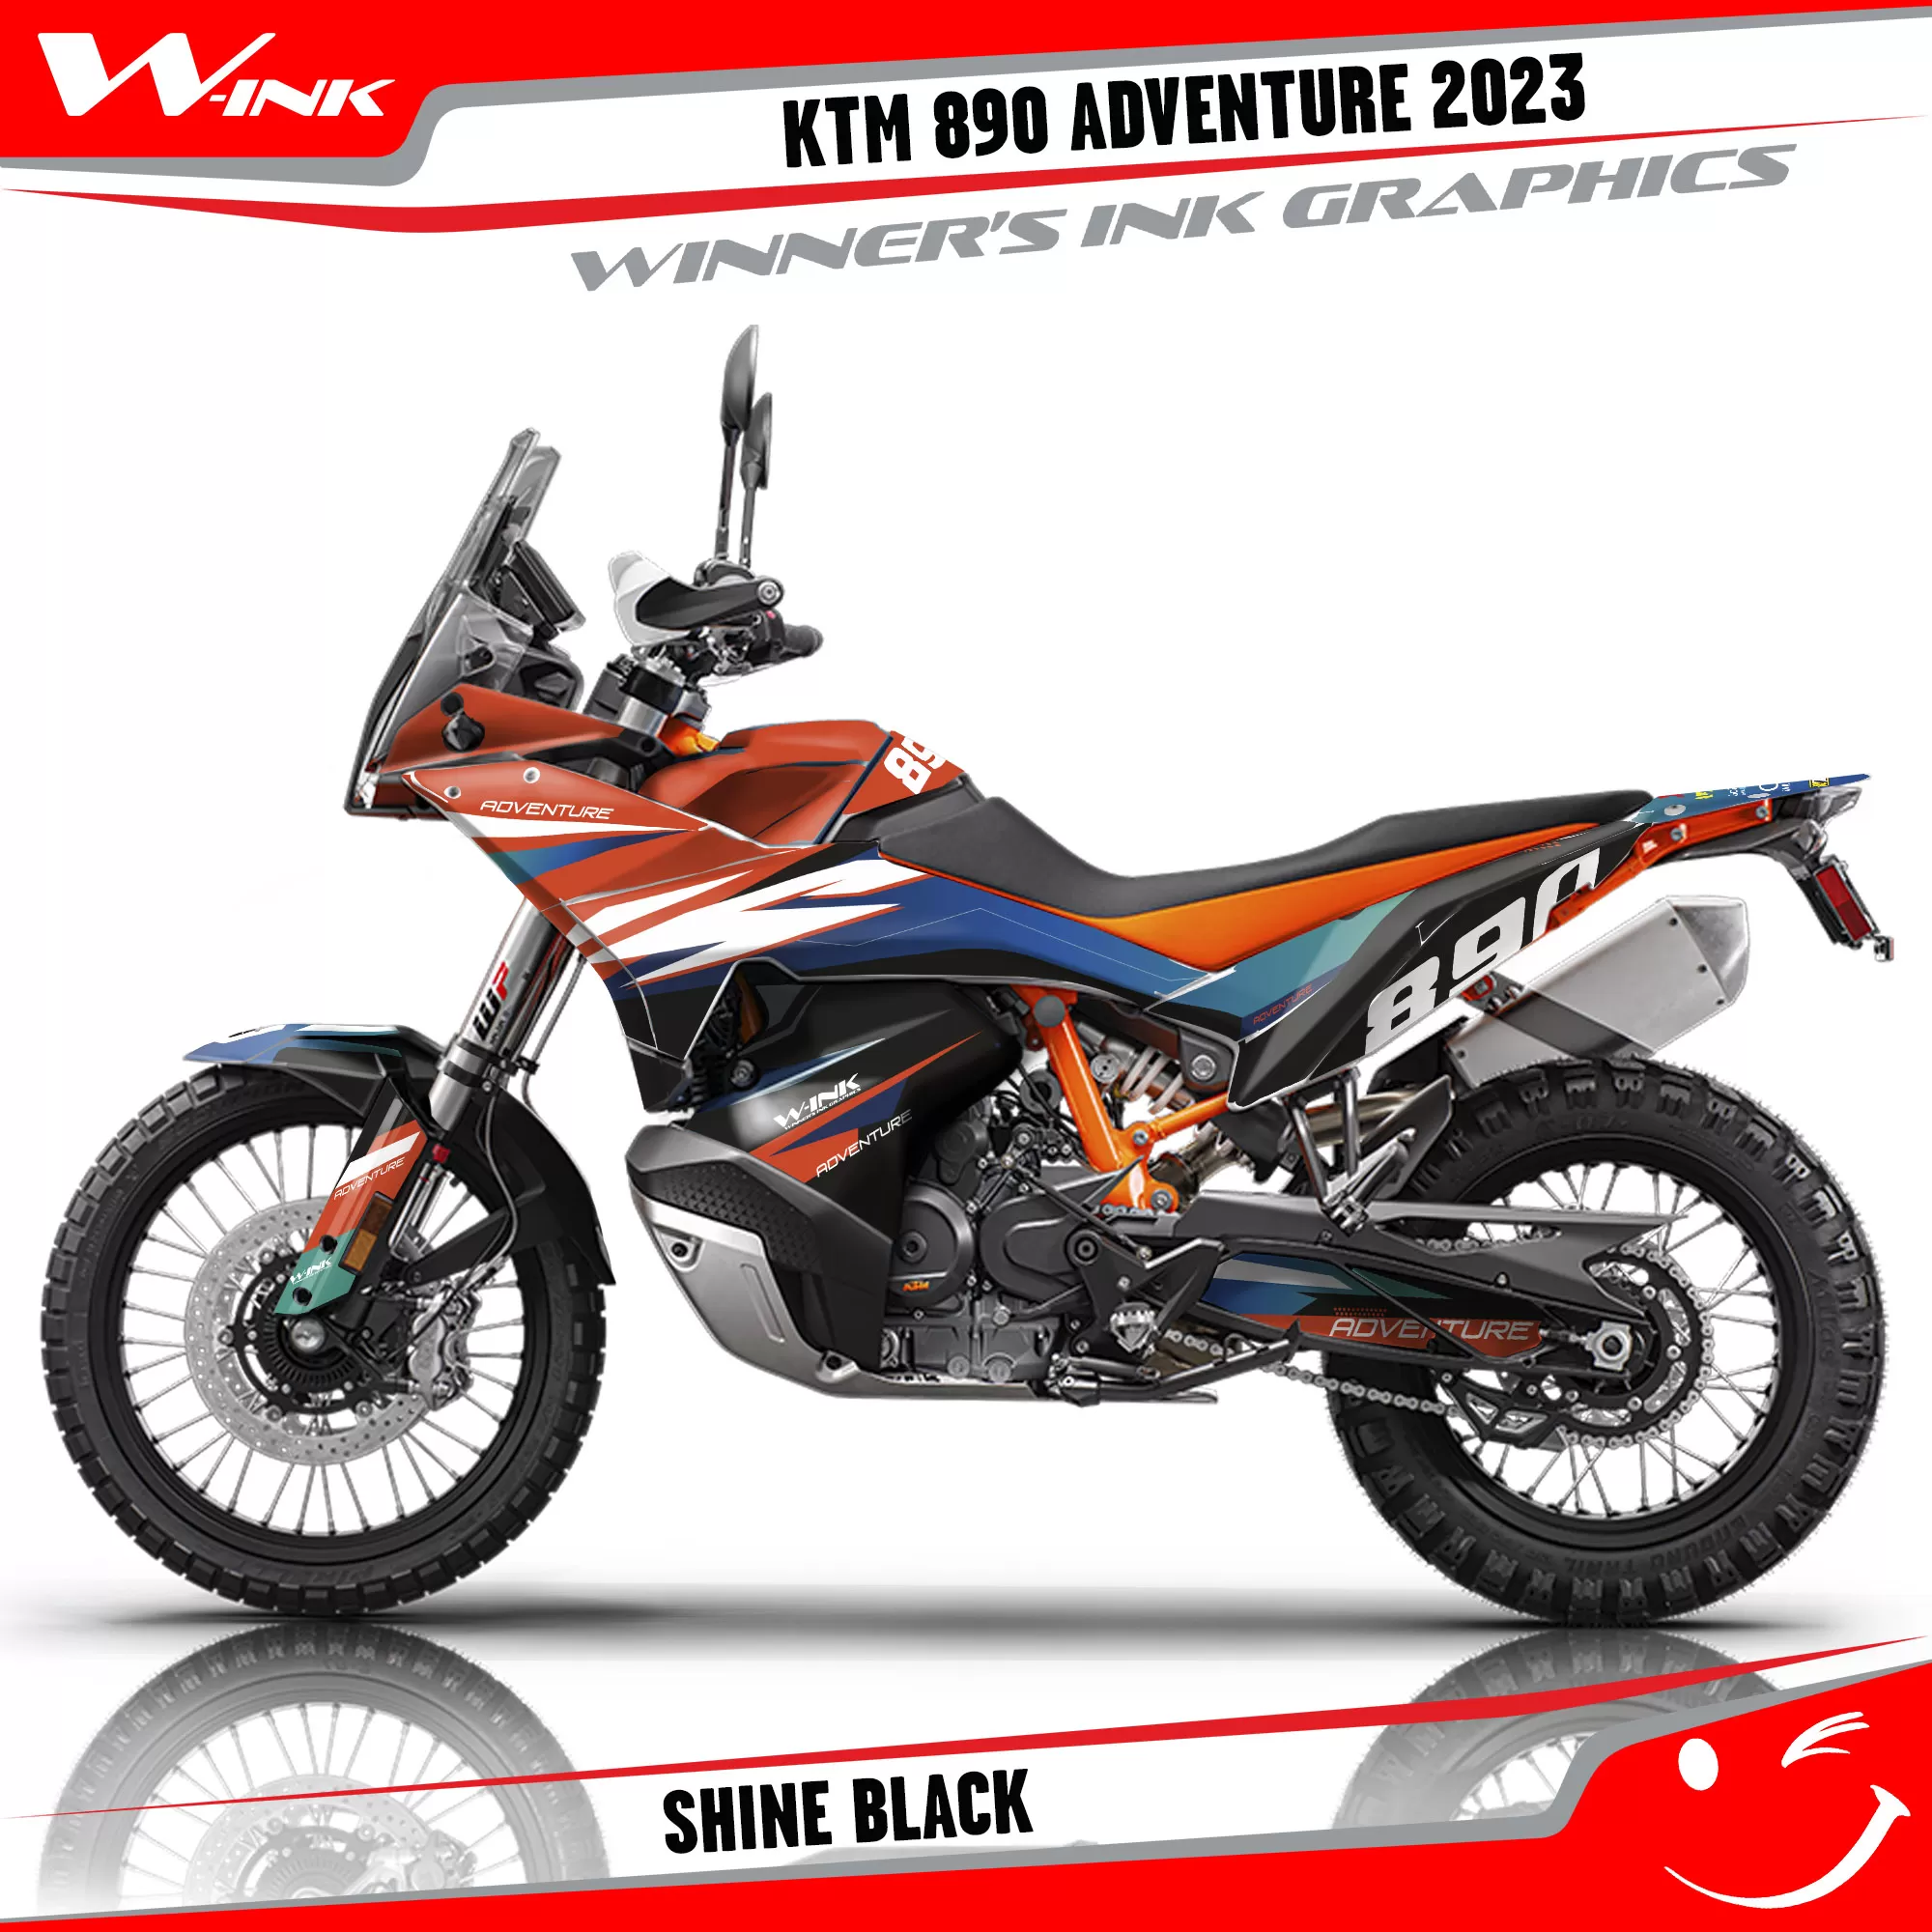 Adventure-890-2023-graphics-kit-and-decals-with-design-Shine-Black